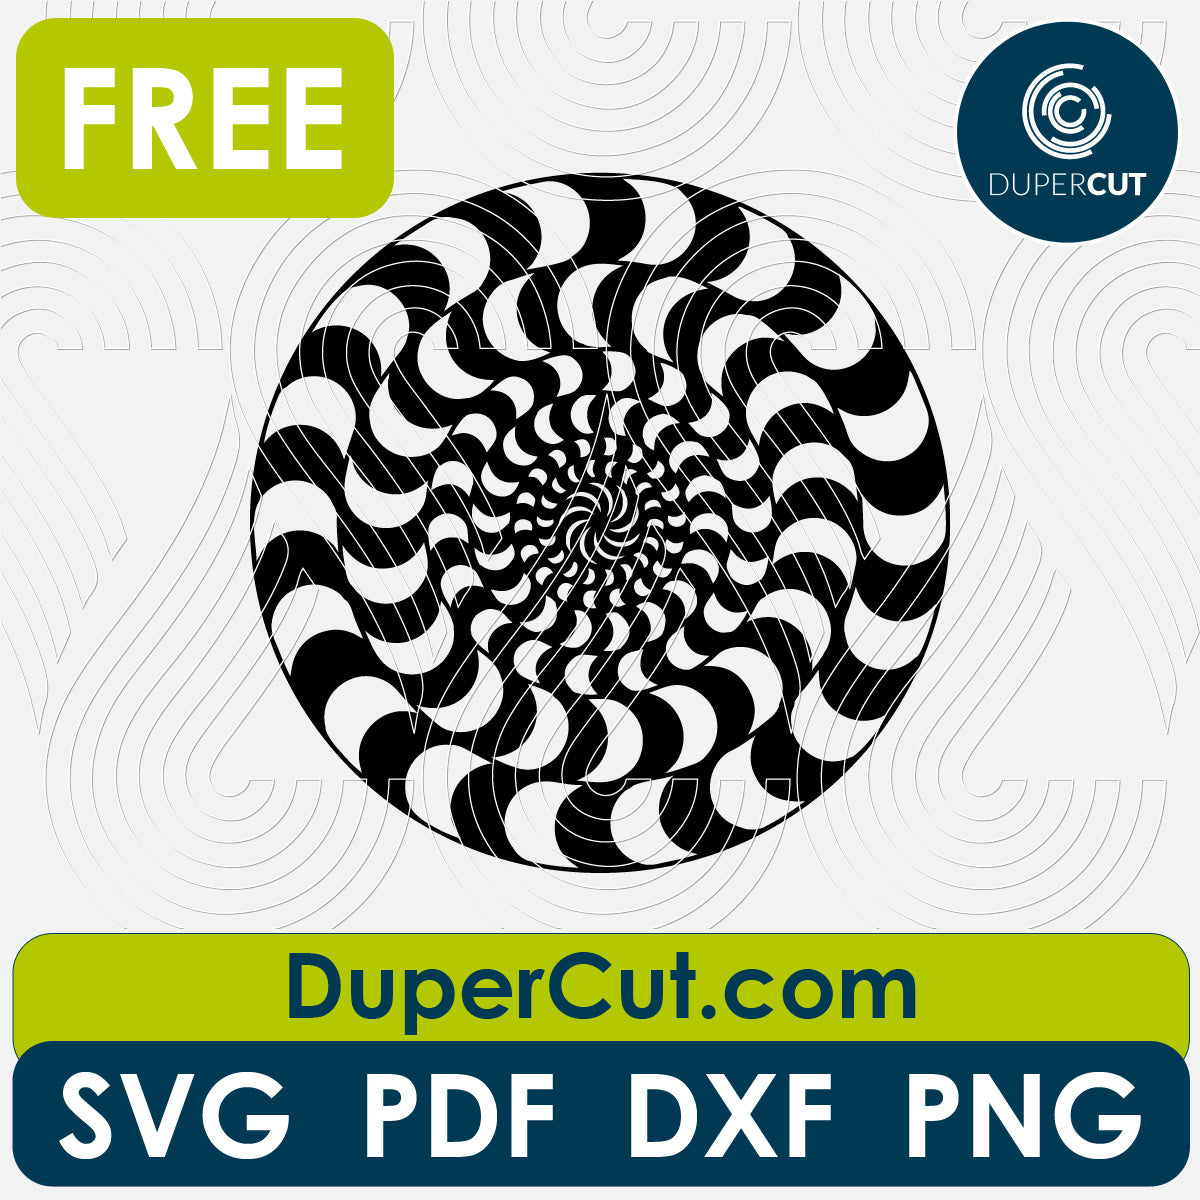 Optical illusion round hypnose pattern - free SVG PNG DXF vector files for laser and blade cutting machines. Glowforge, Cricut, Silhouette cameo templates by DuperCut.com